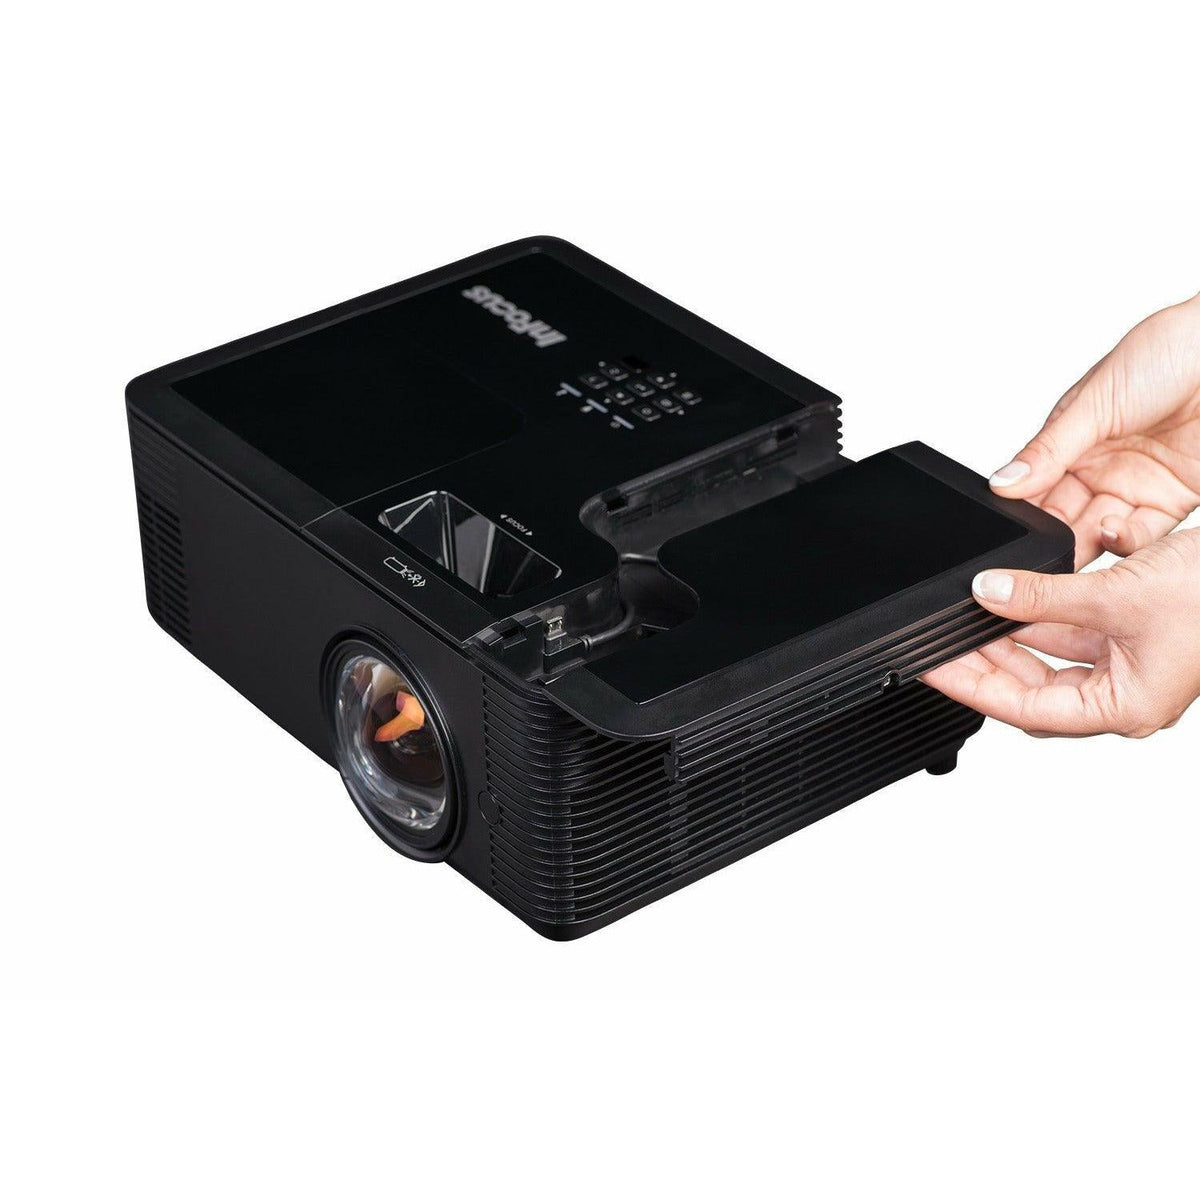 InFocus 4000 Lumens 1080p Projector with Short Throw Lens - Black | IN138HDST (7517065806012)